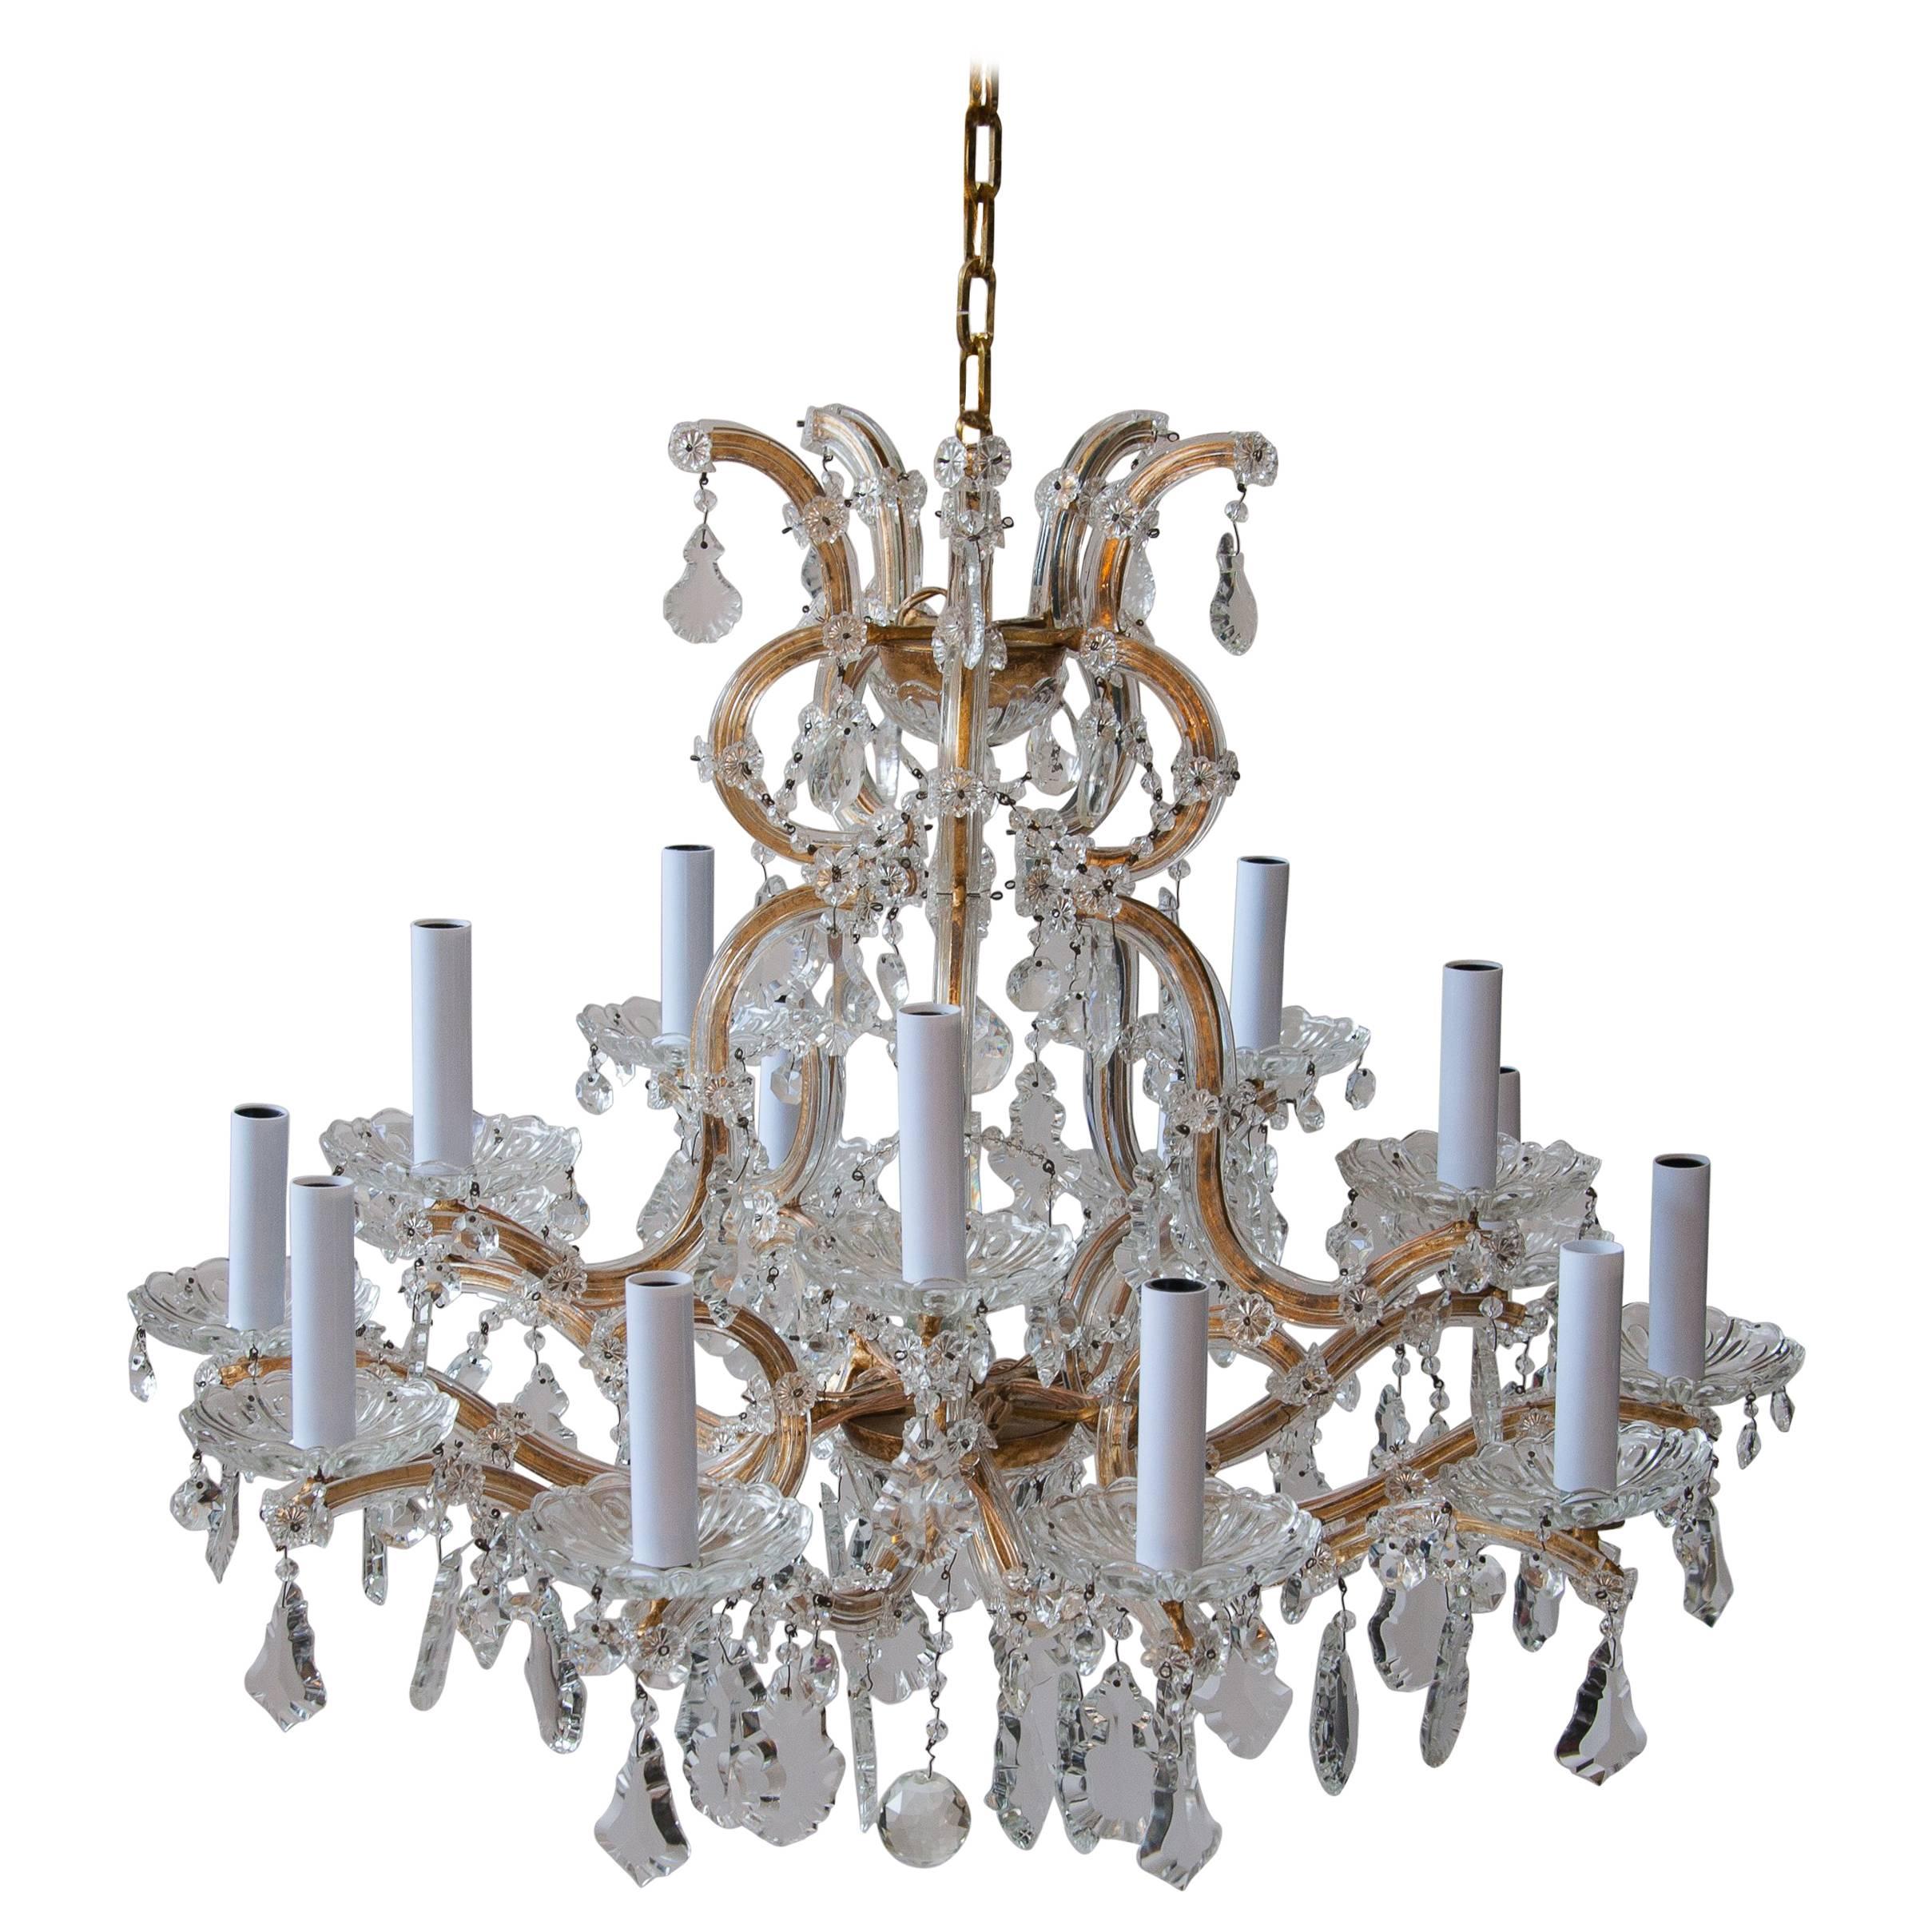 Austrian Crown Shaped Crystal Chandelier From Vienna, circa 1930 For Sale